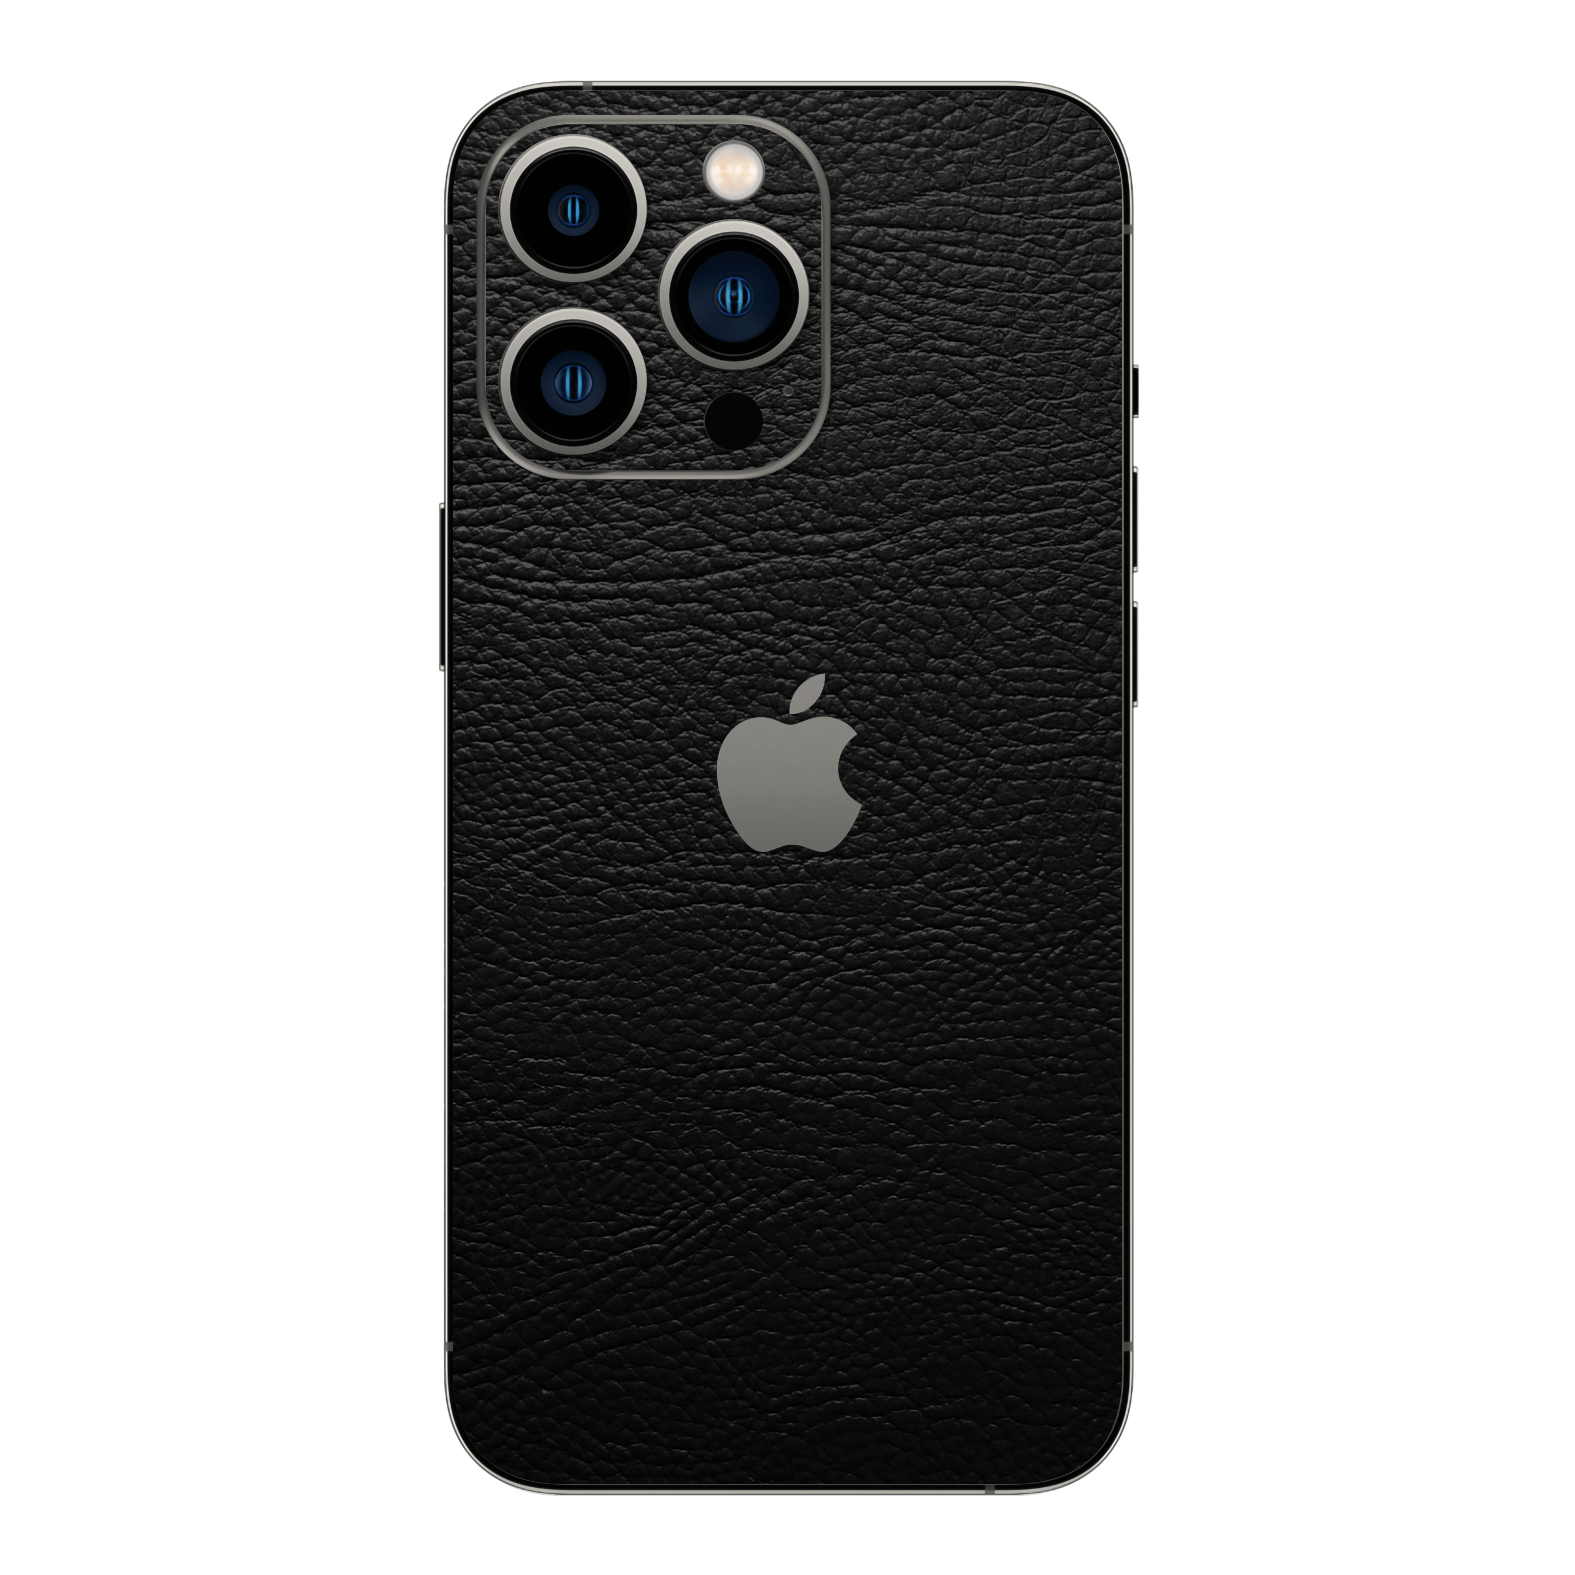 iPhone 14 PRO LUXURIA RIDERS Black LEATHER Textured Skin - Premium Protective Skin Wrap Sticker Decal Cover by QSKINZ | Qskinz.com